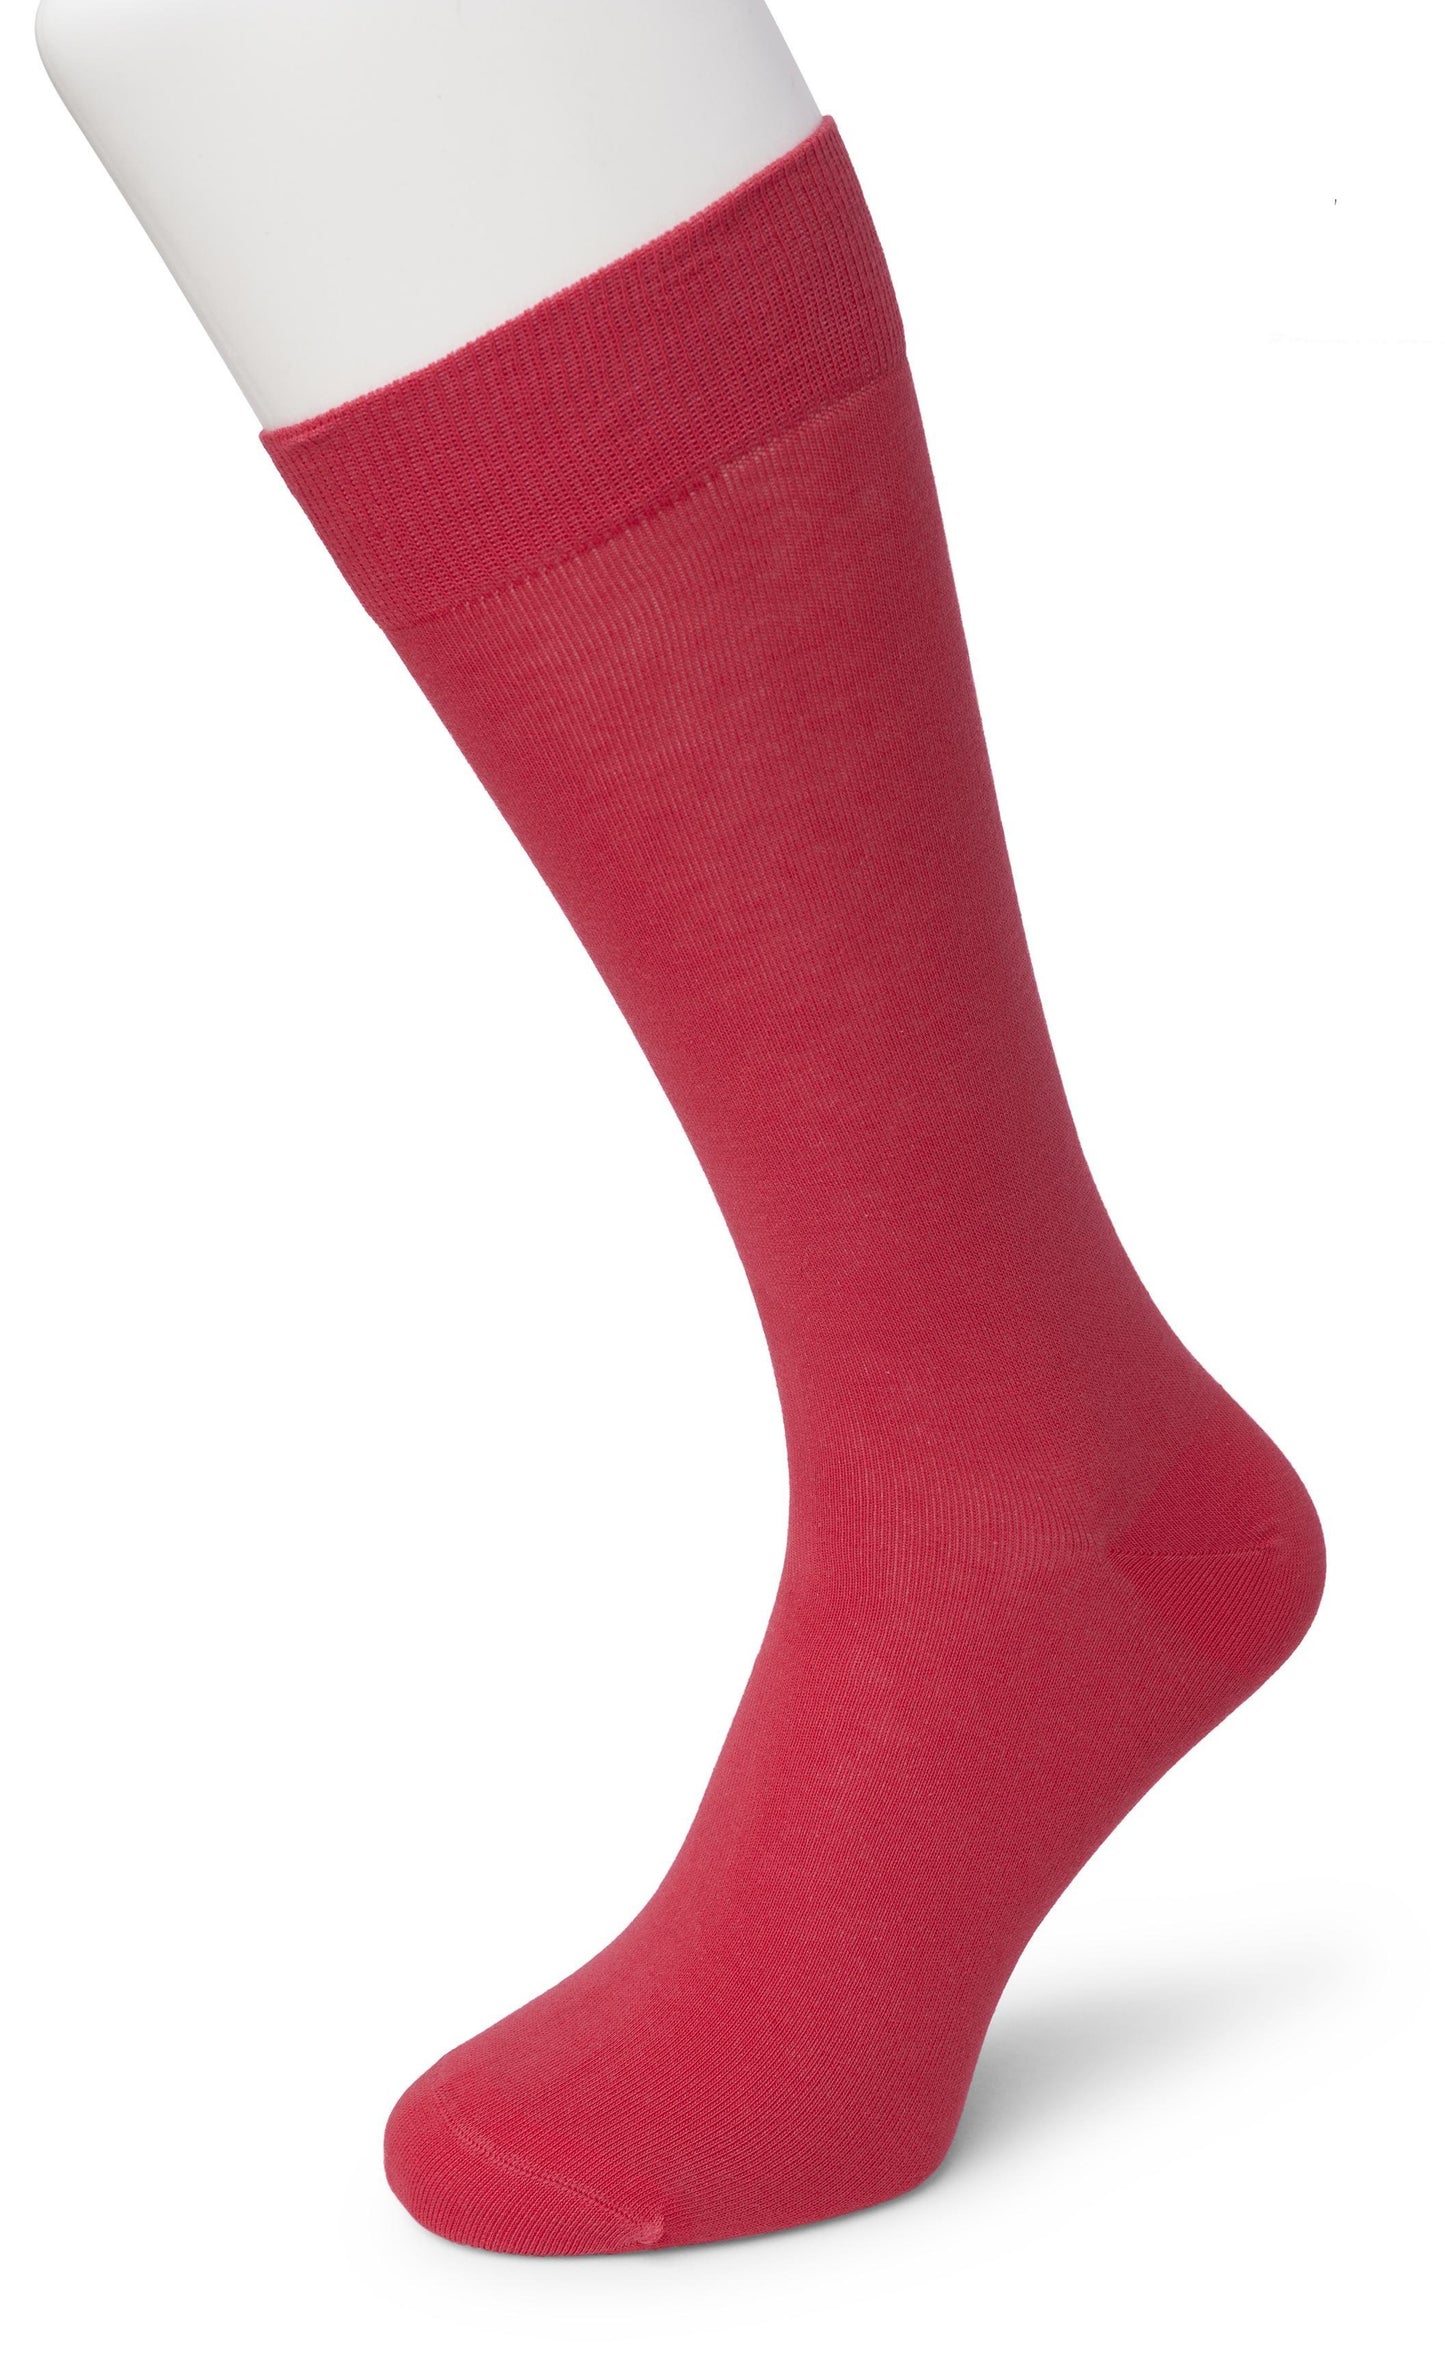 Bonnie Doon BD632401 Cotton Sock - light red (watermelon) ankle socks available in men size